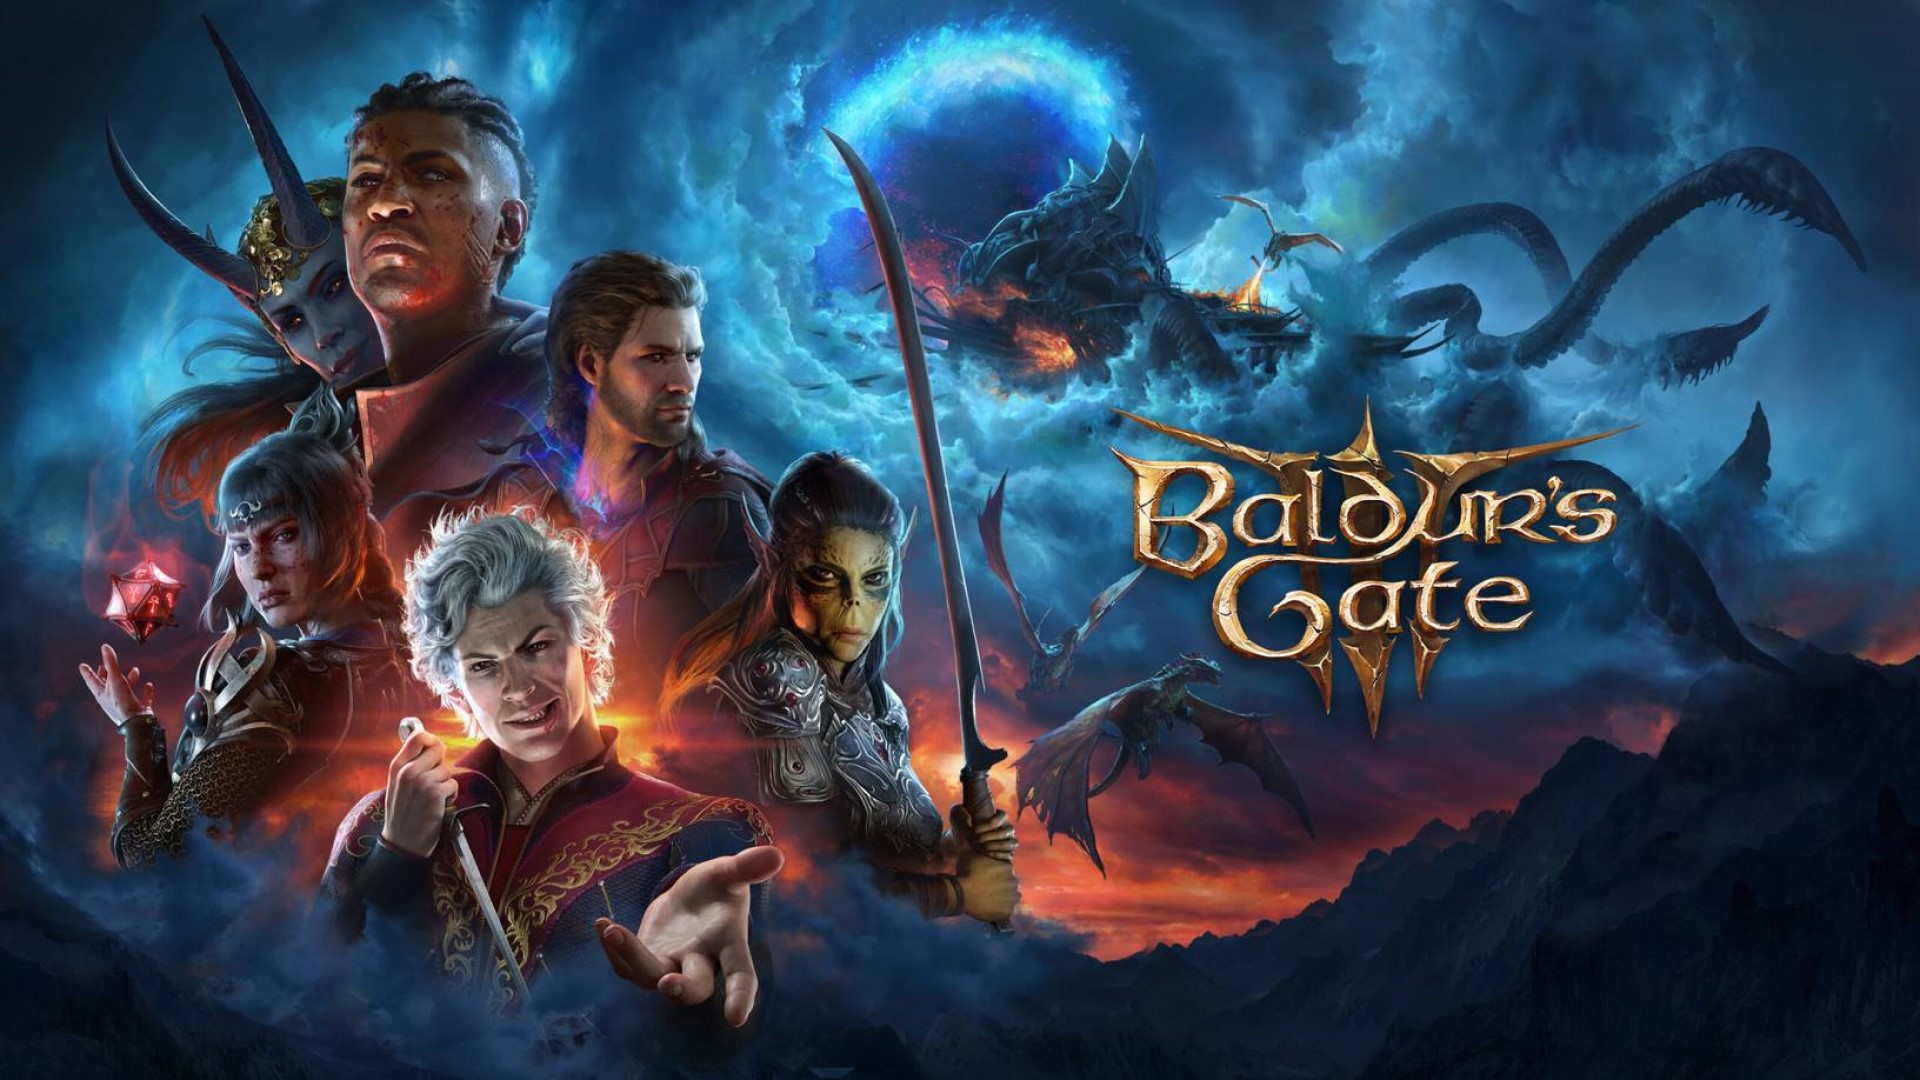 Baldur’s Gate 3 is Coming to Xbox Series X/S in 2023